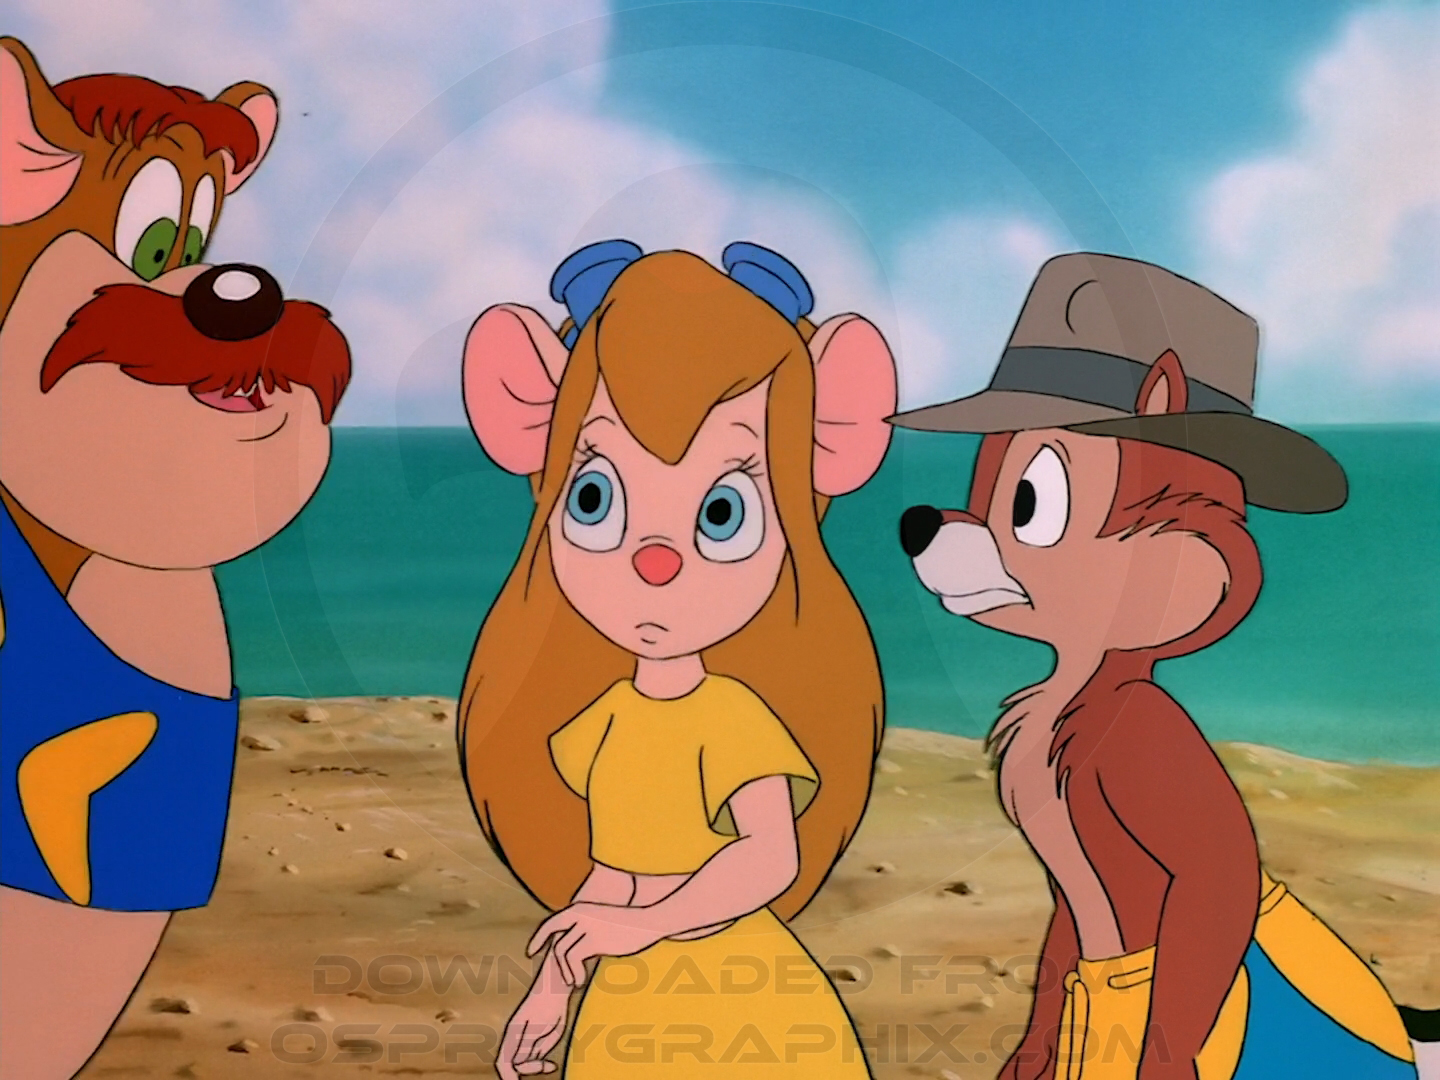 Chip 'n Dale Rescue Rangers - Gadget's Summer Wear Page 1.